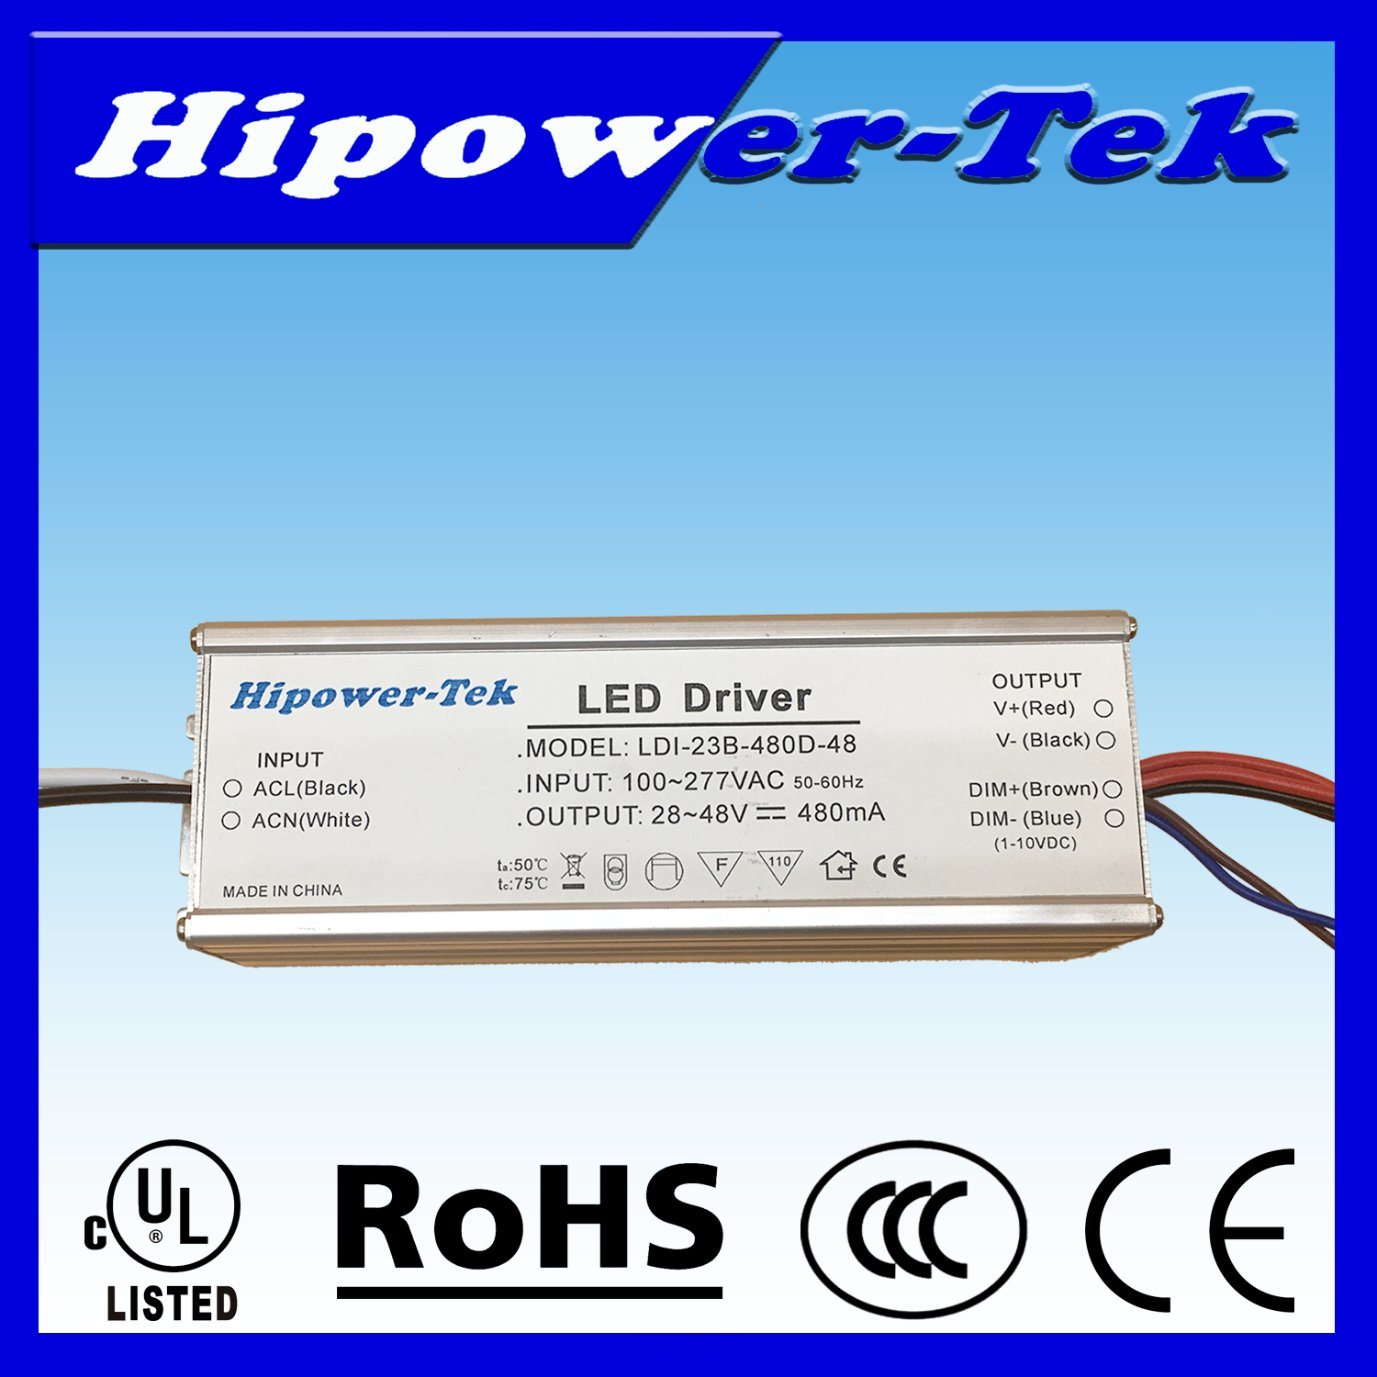 20 Constant Current Warranty 3 Years Economical Two-Stage Design Indoor LED Driver